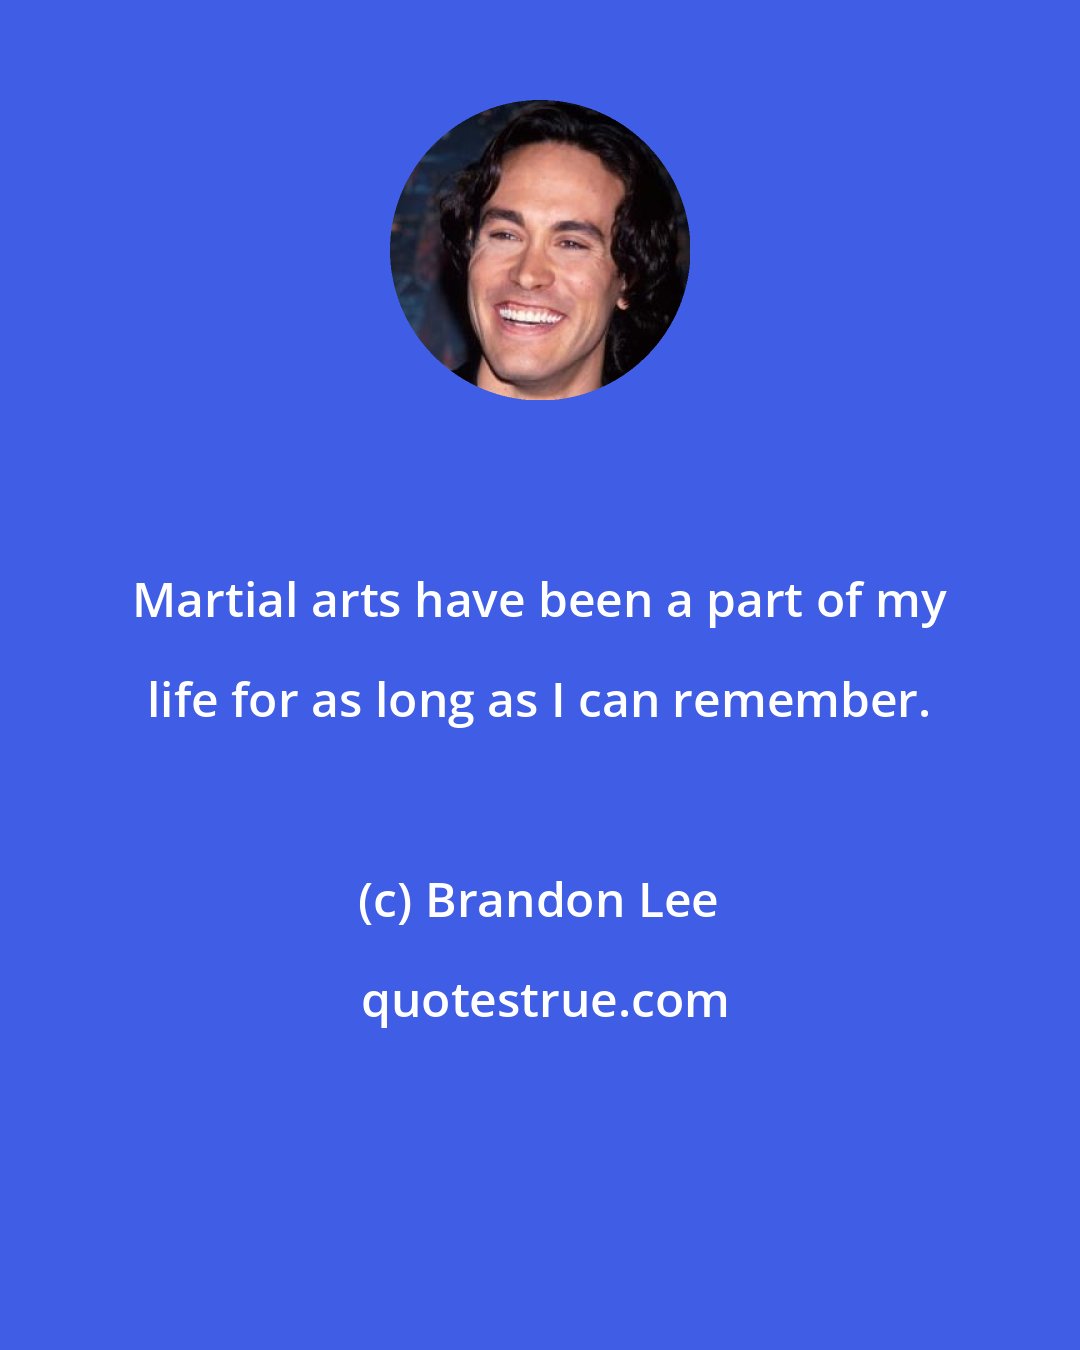 Brandon Lee: Martial arts have been a part of my life for as long as I can remember.